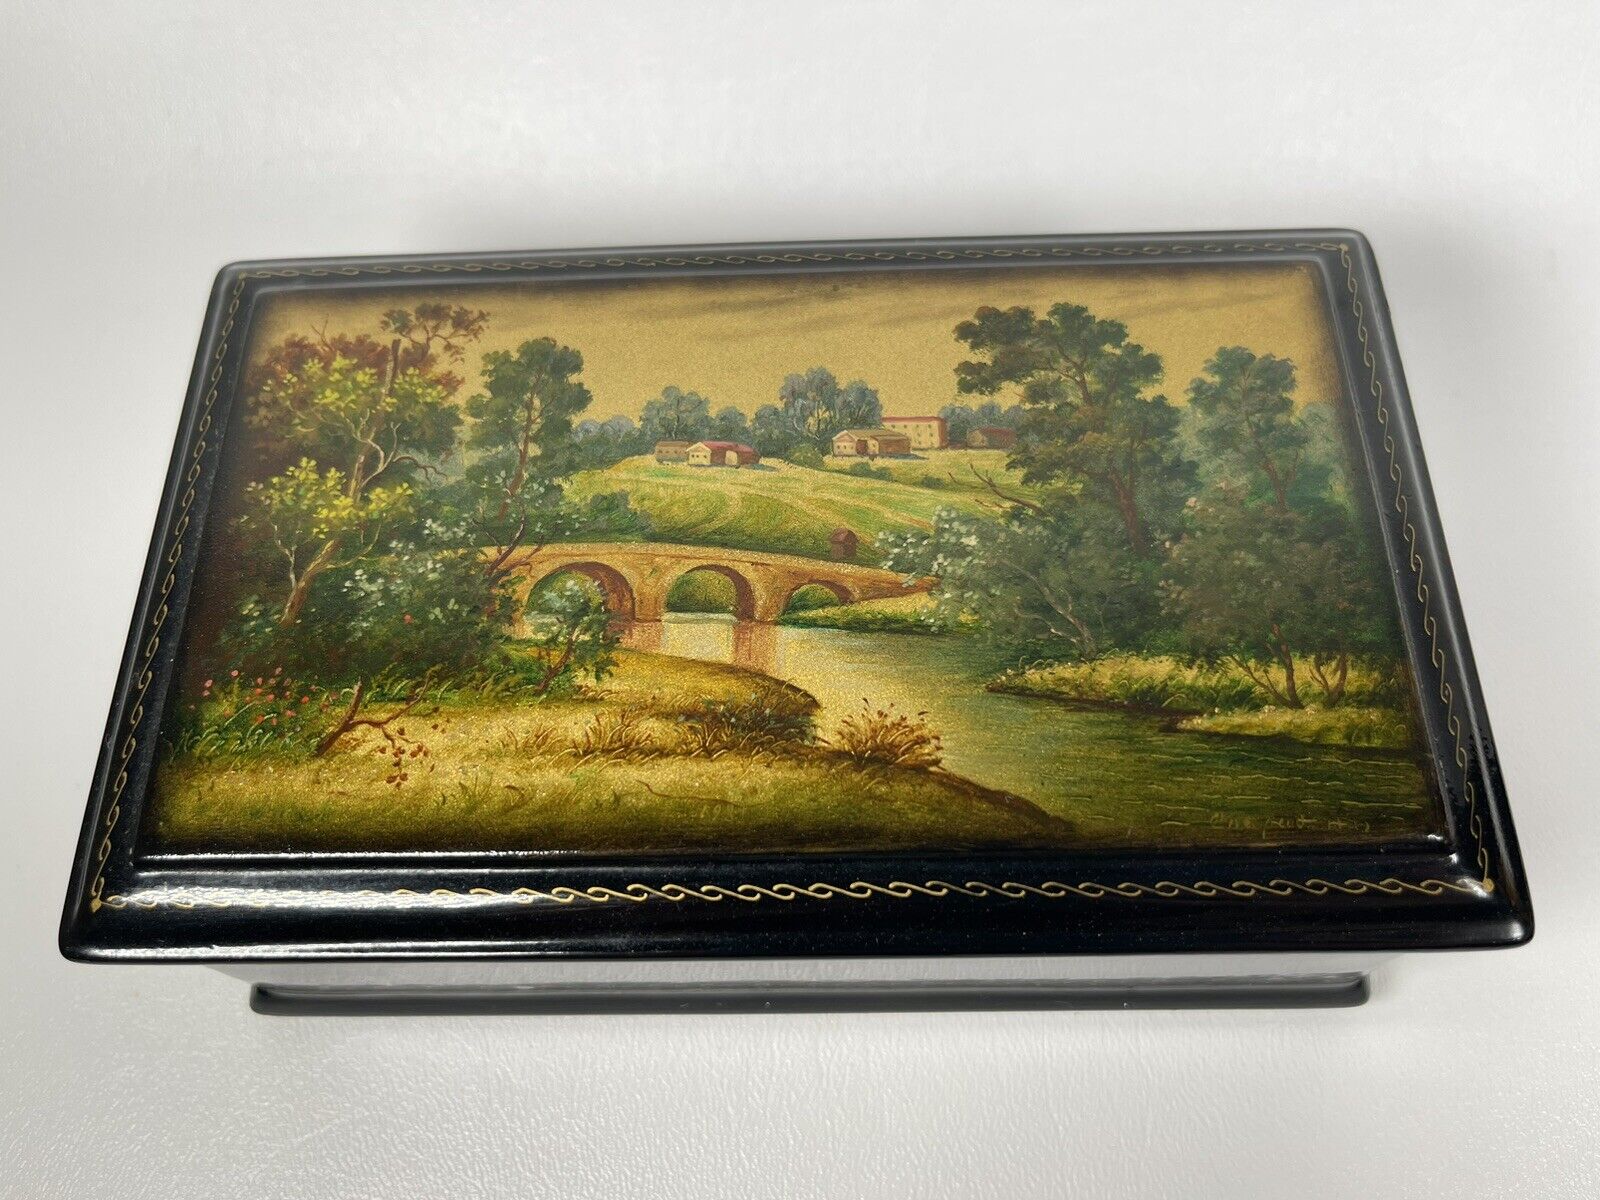 Vintage Black Lacquer Hand Painted Russian Box, Hinged, Made In USSR